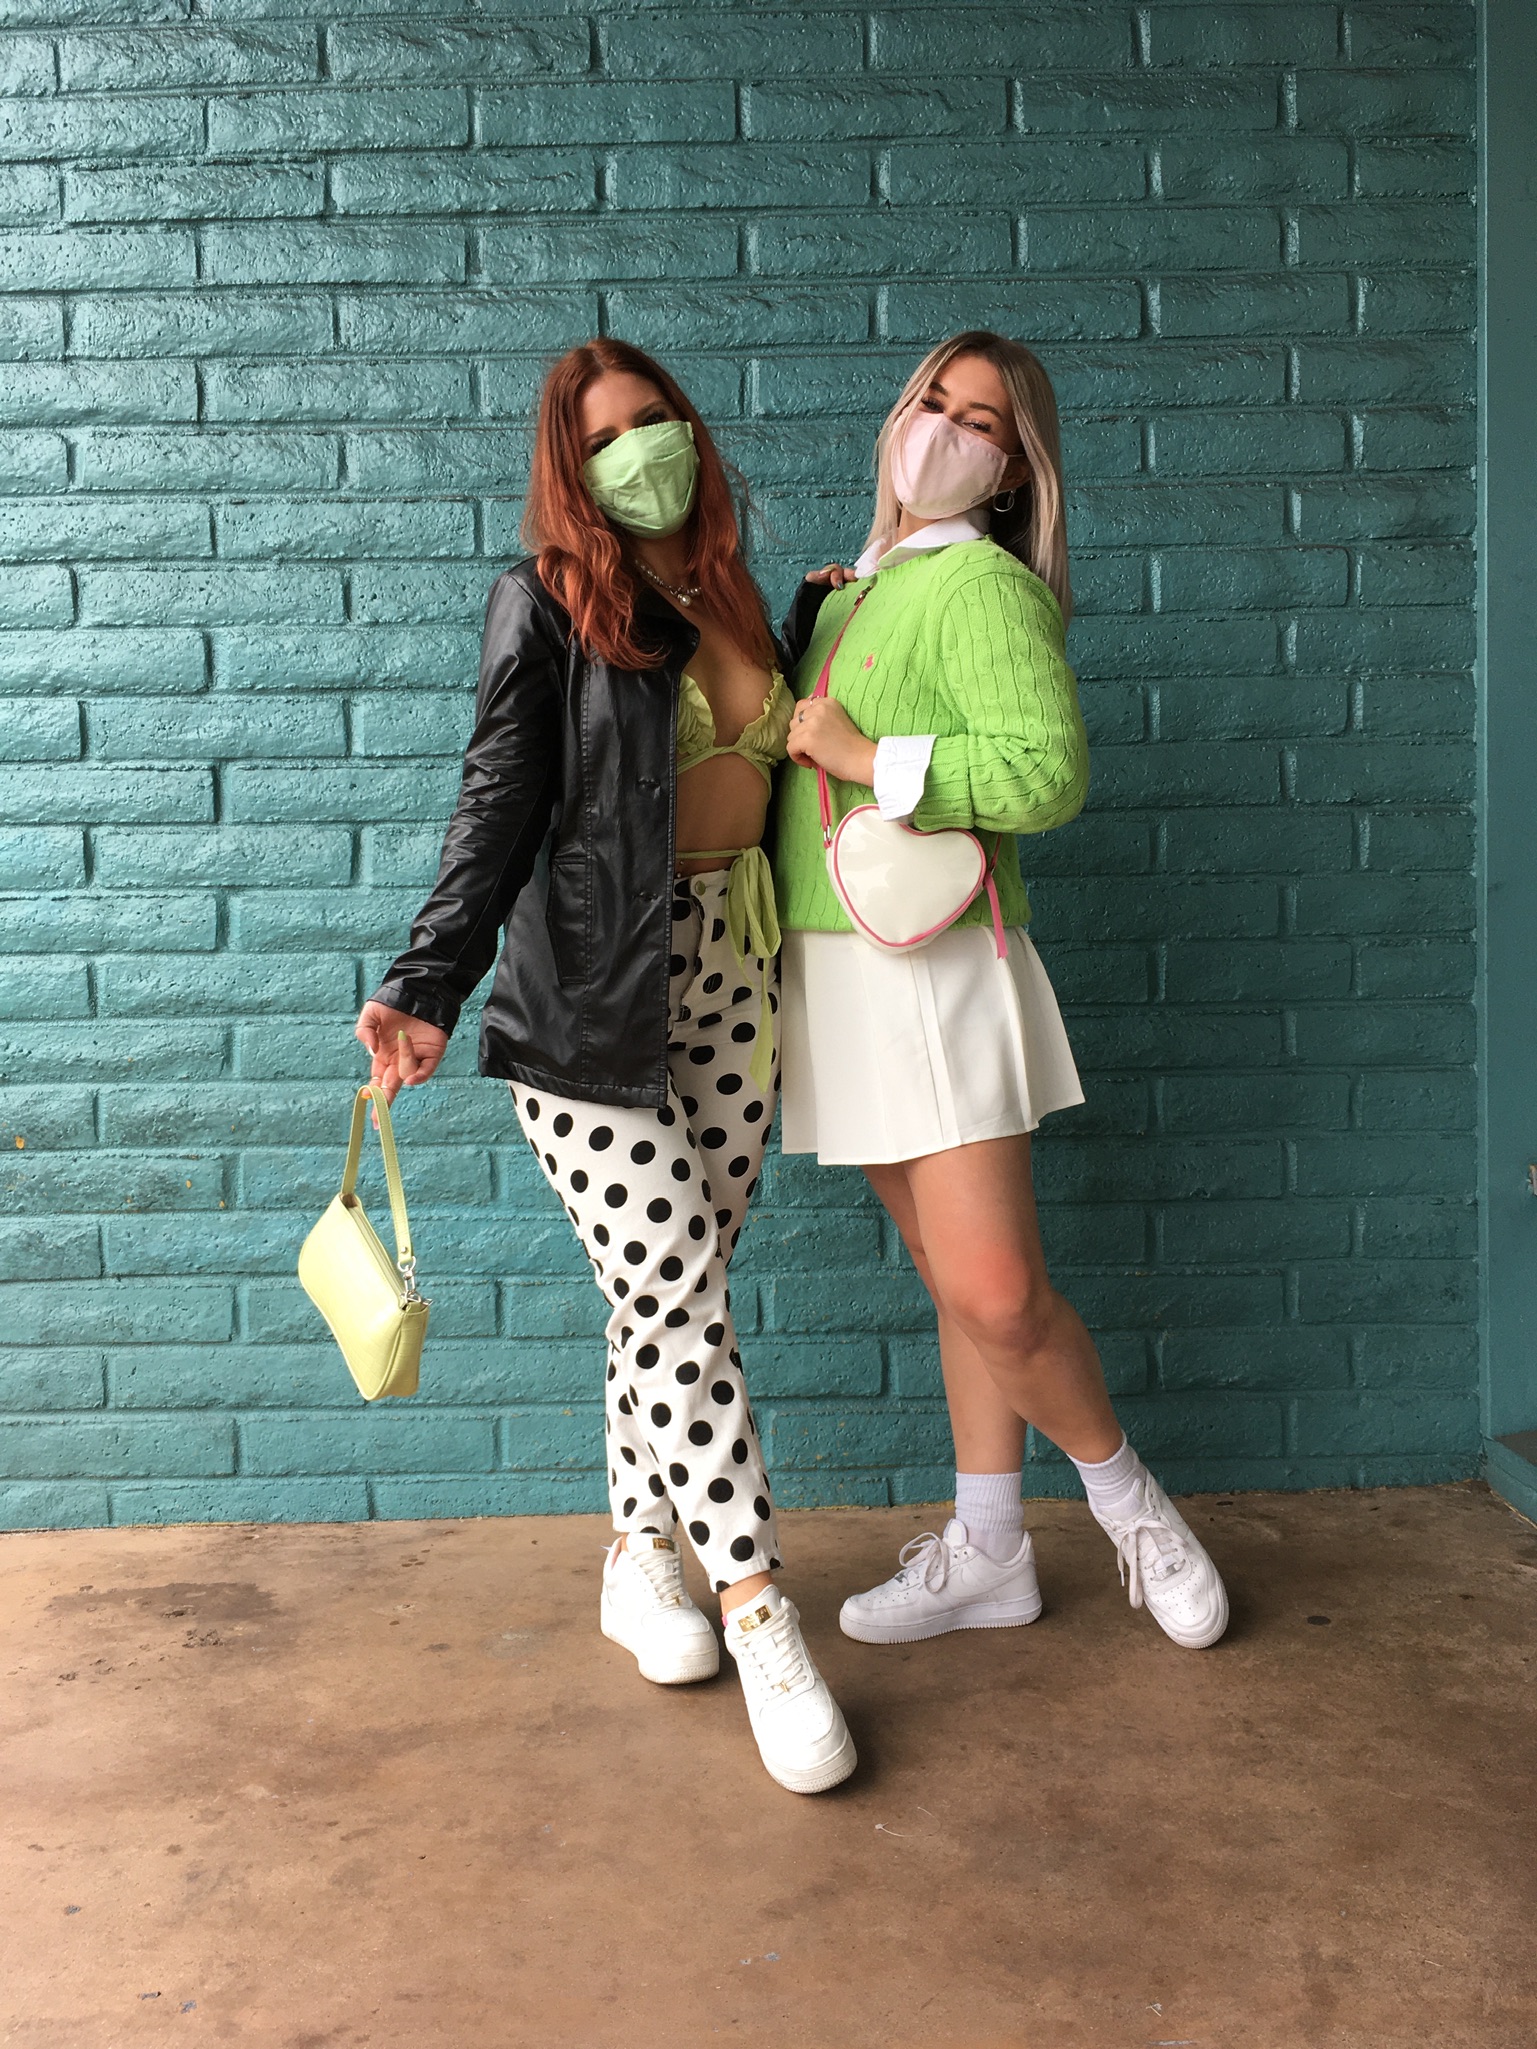 Two people pose close together in front of teal brick wall. One person wears green bikini top underneath black leather jacket and polka-dot pants. The other wears a bright green Ralph Lauren sweater with white tennis skirt and heart-shaped bag